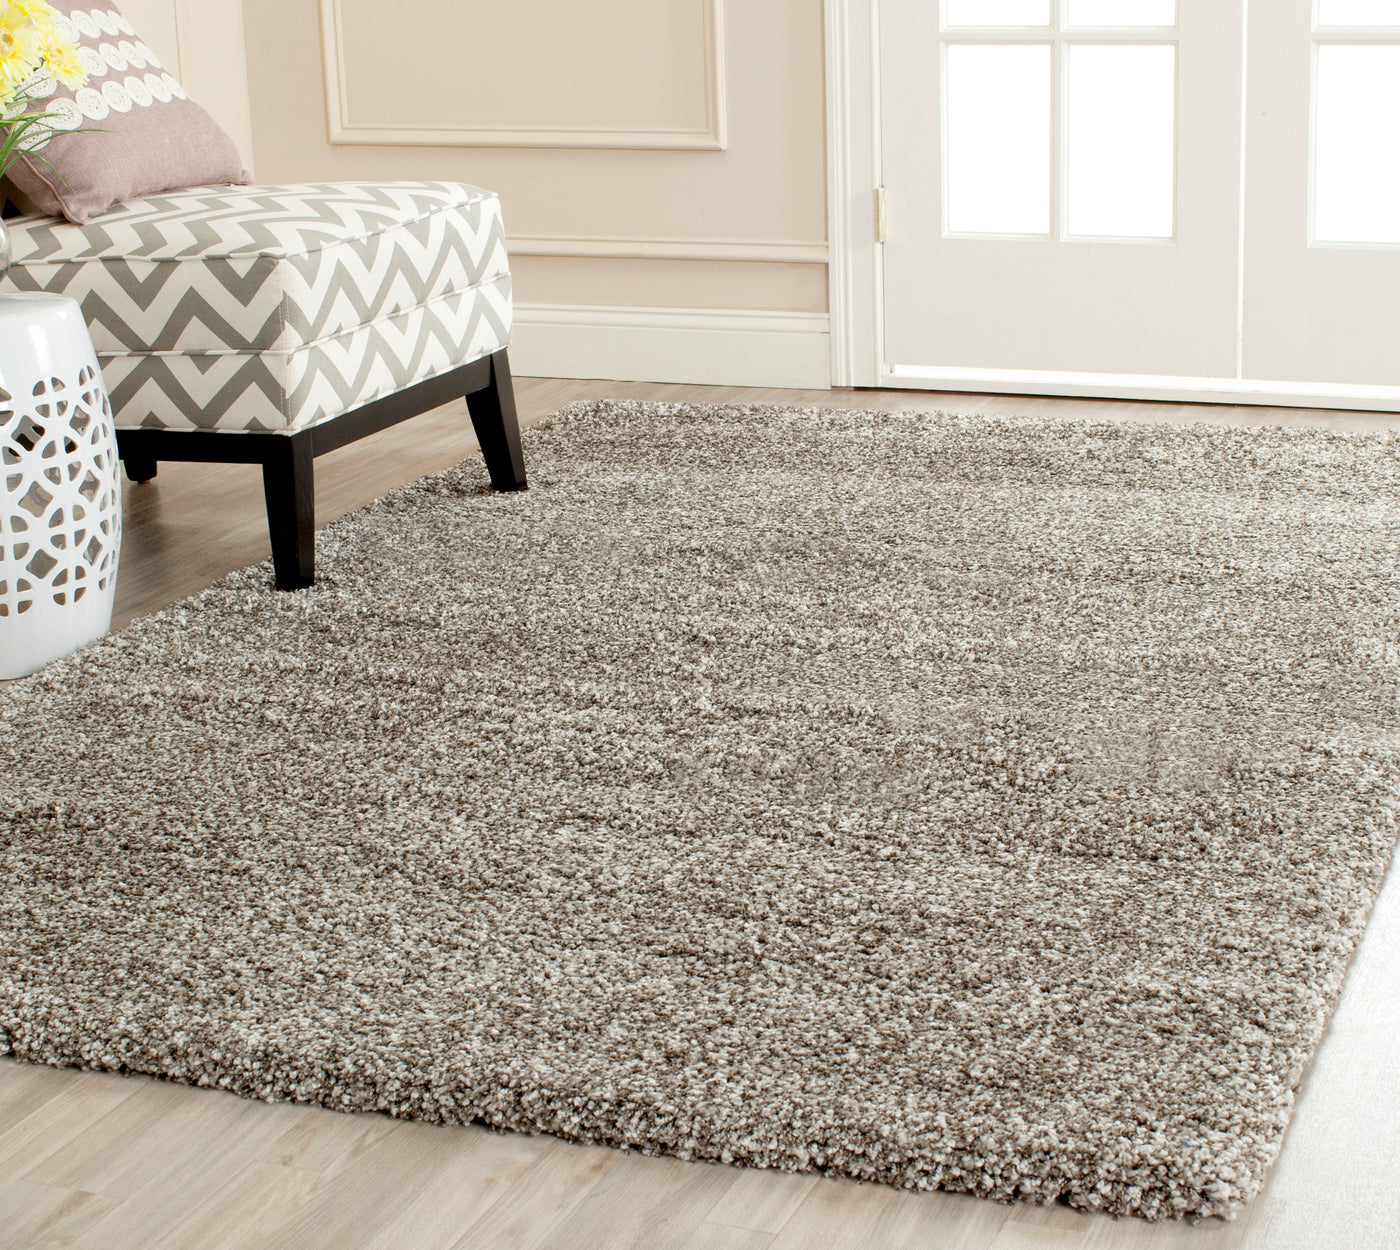 Dual Surface All-in-One 4 ft. x 6 ft. Non-Slip Rug Pad RAA-4x6